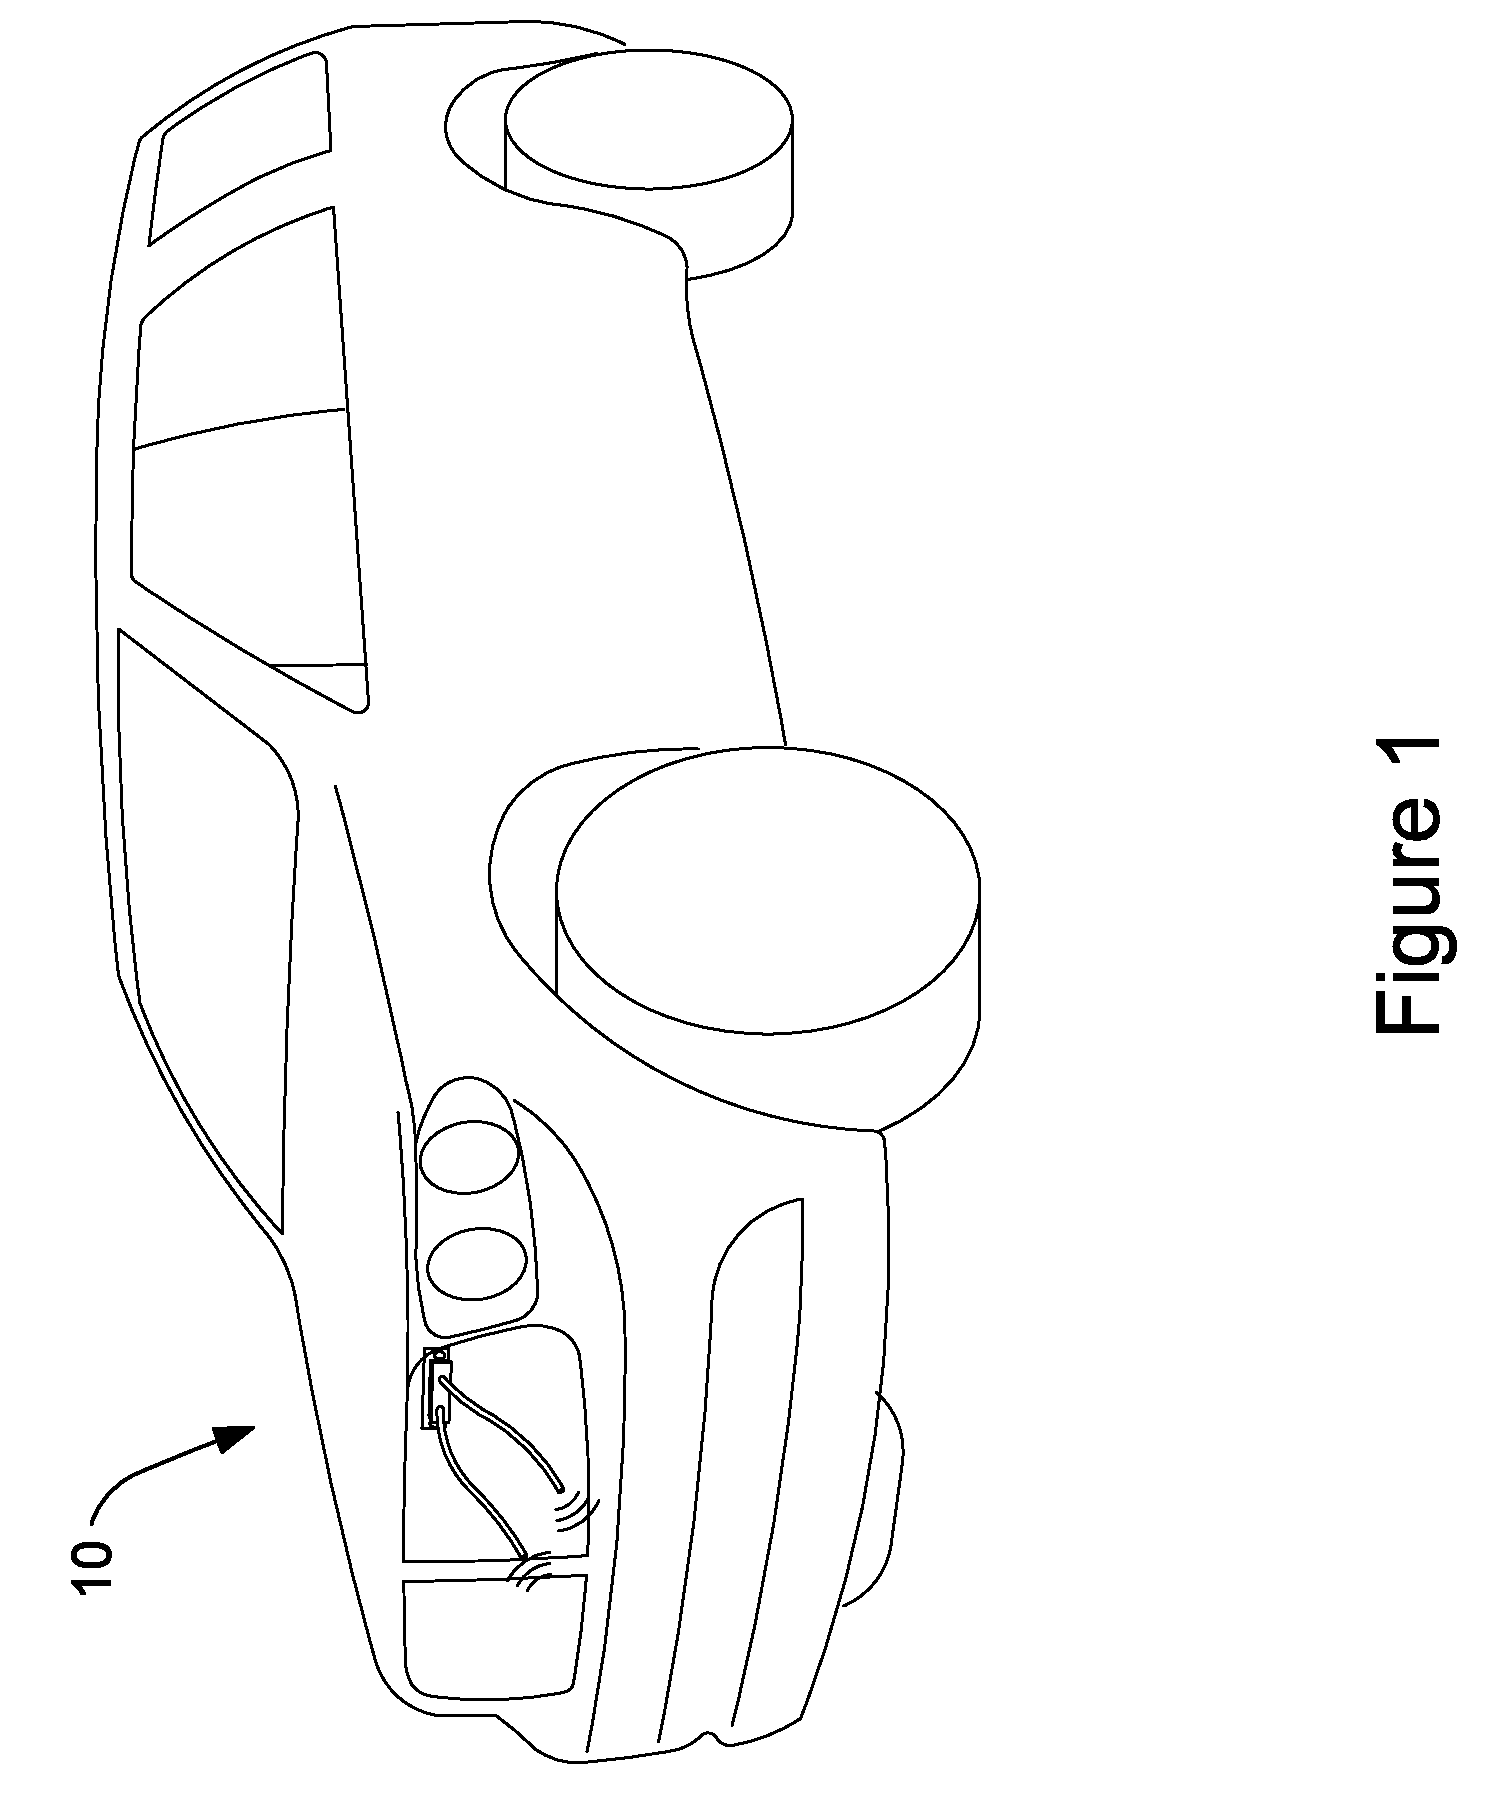 Concealed light detection and ranging system